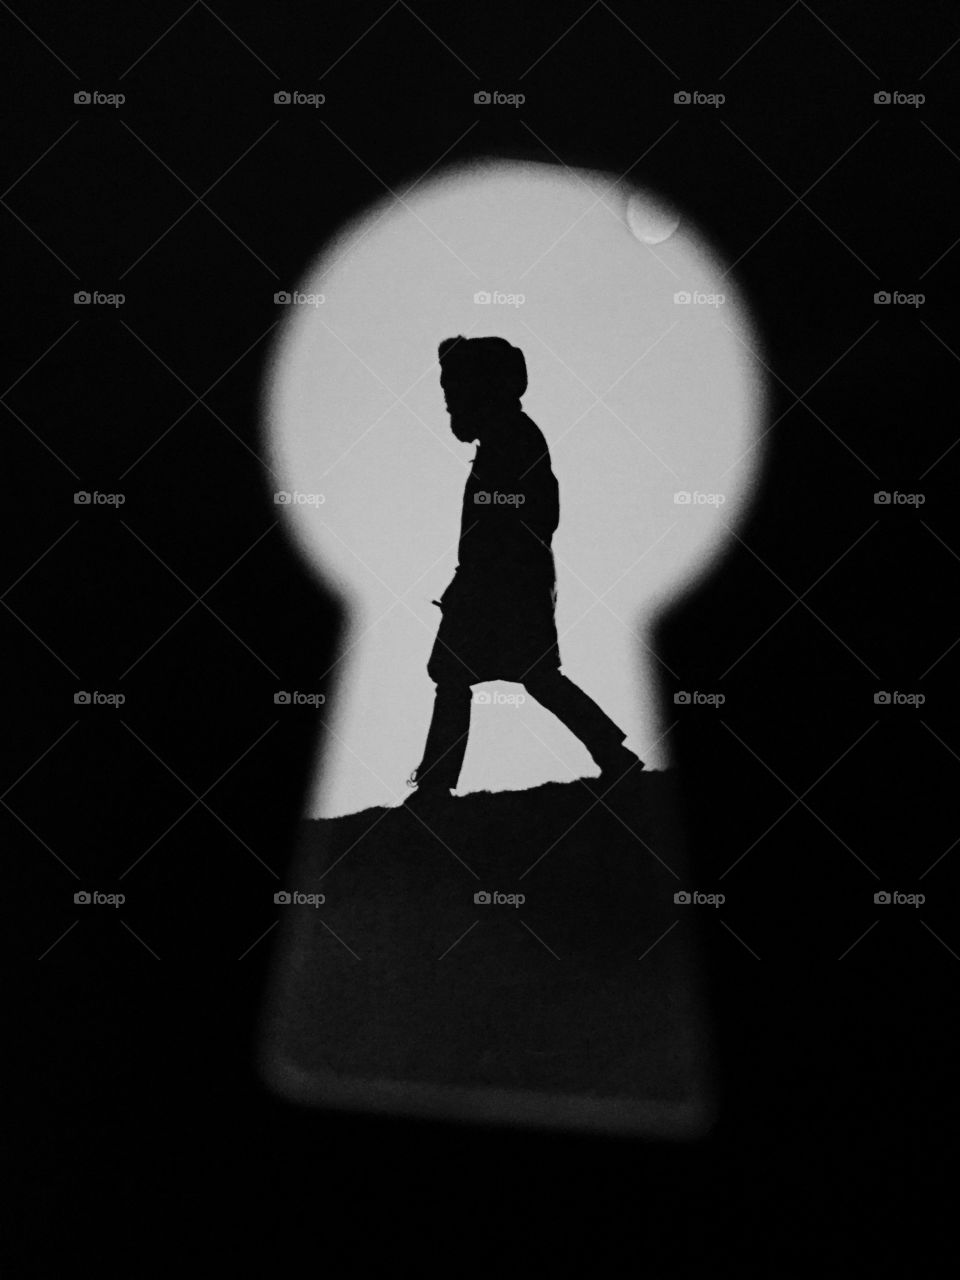 Silhouette of person seen through keyhole